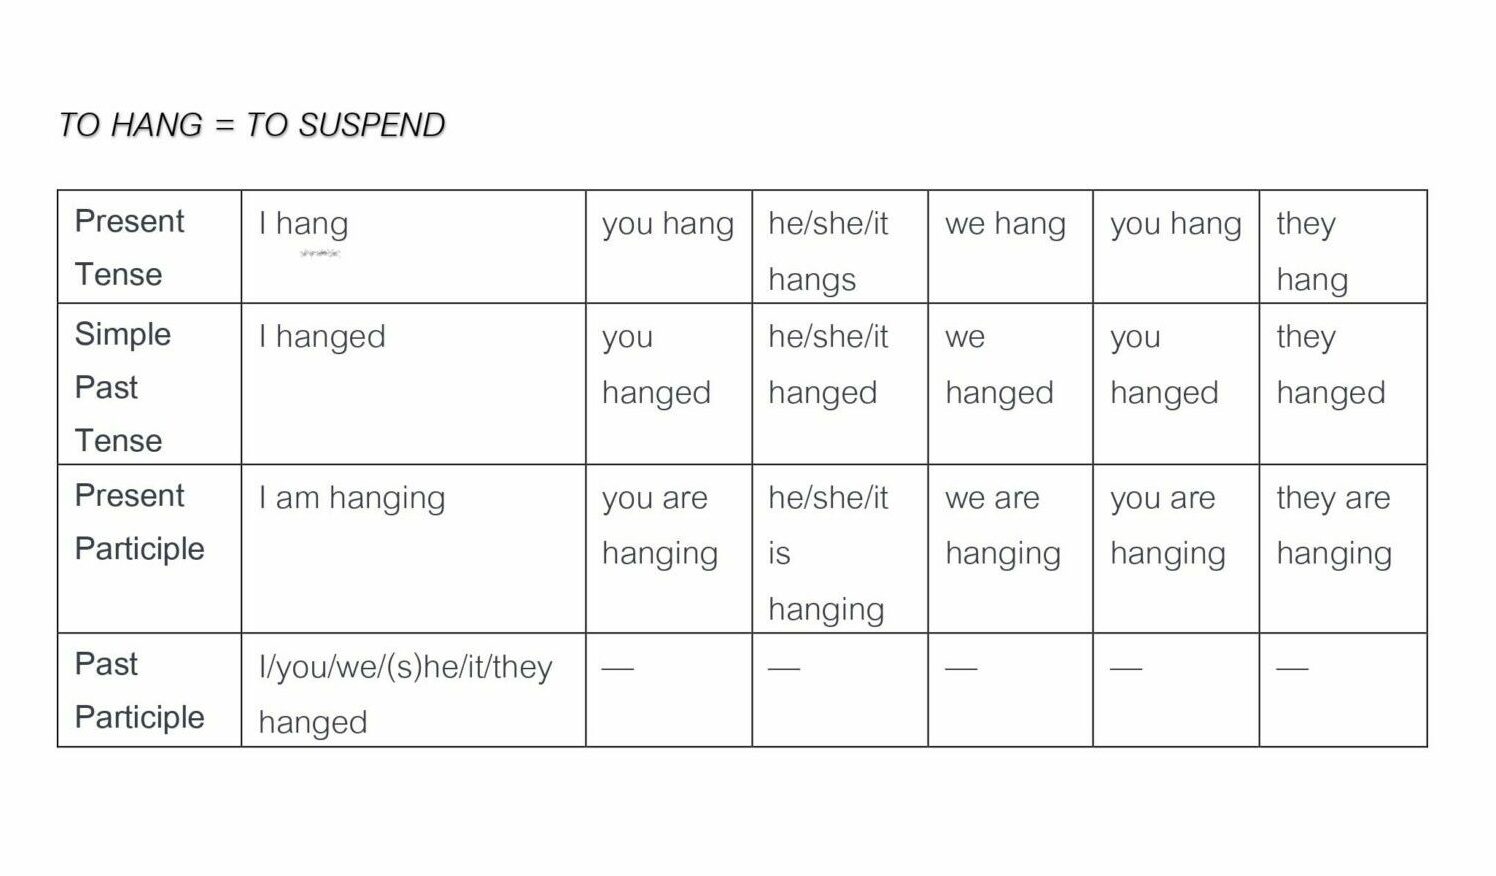 HANGED VS. HUNG: complete conjugation chart of to hang (suspend)